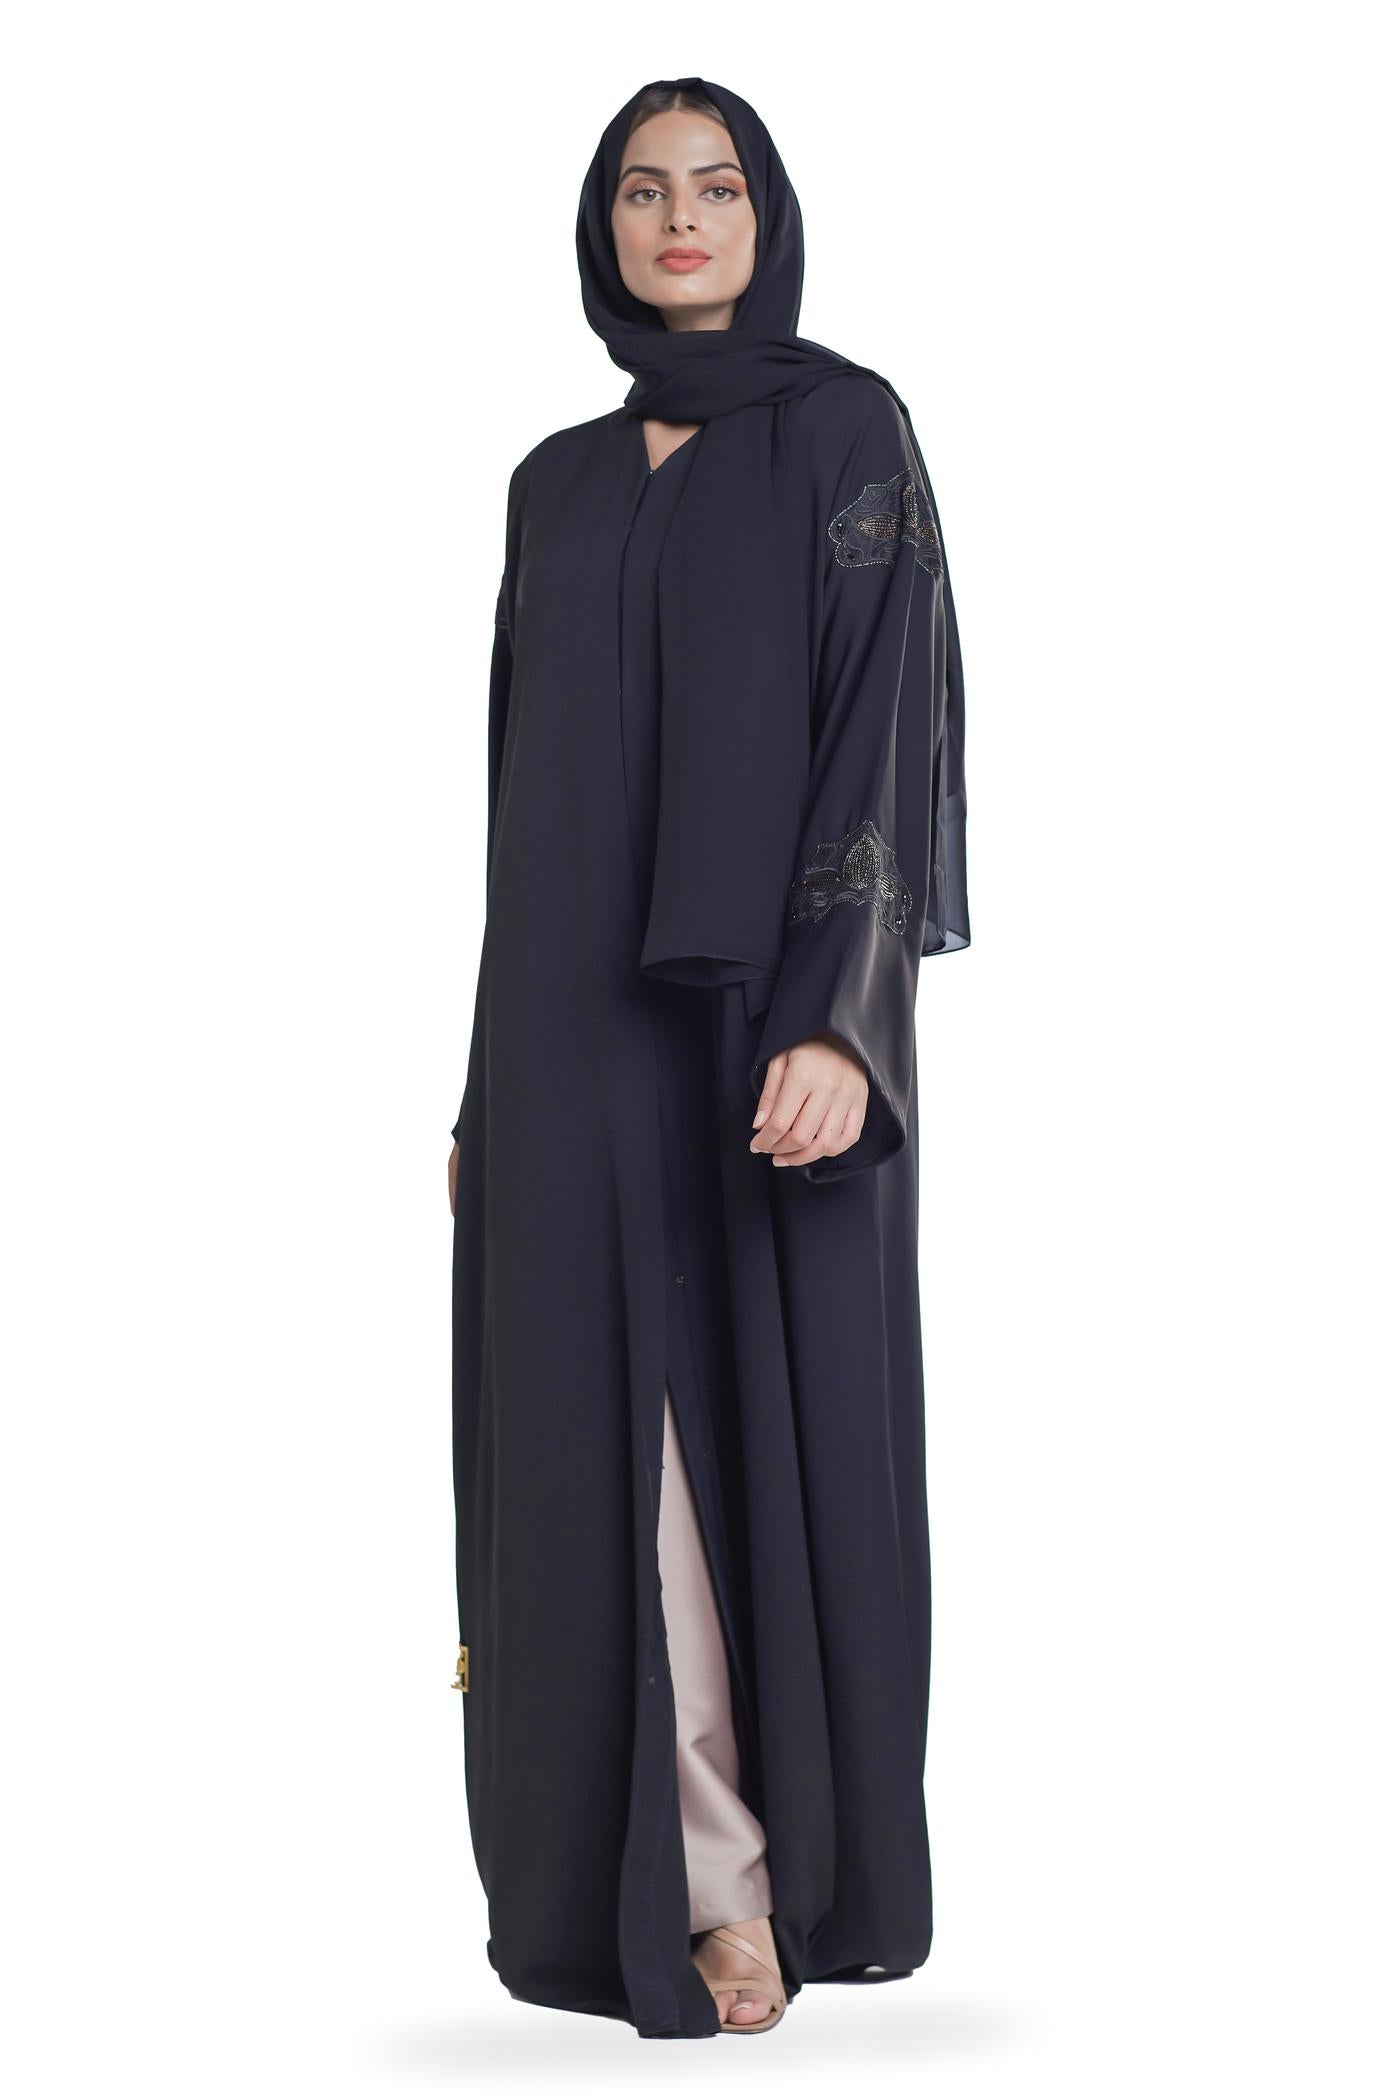 Juhaina Abaya: Elegant black abaya with intricate embroidery and a flattering silhouette by Fashion by Shehna